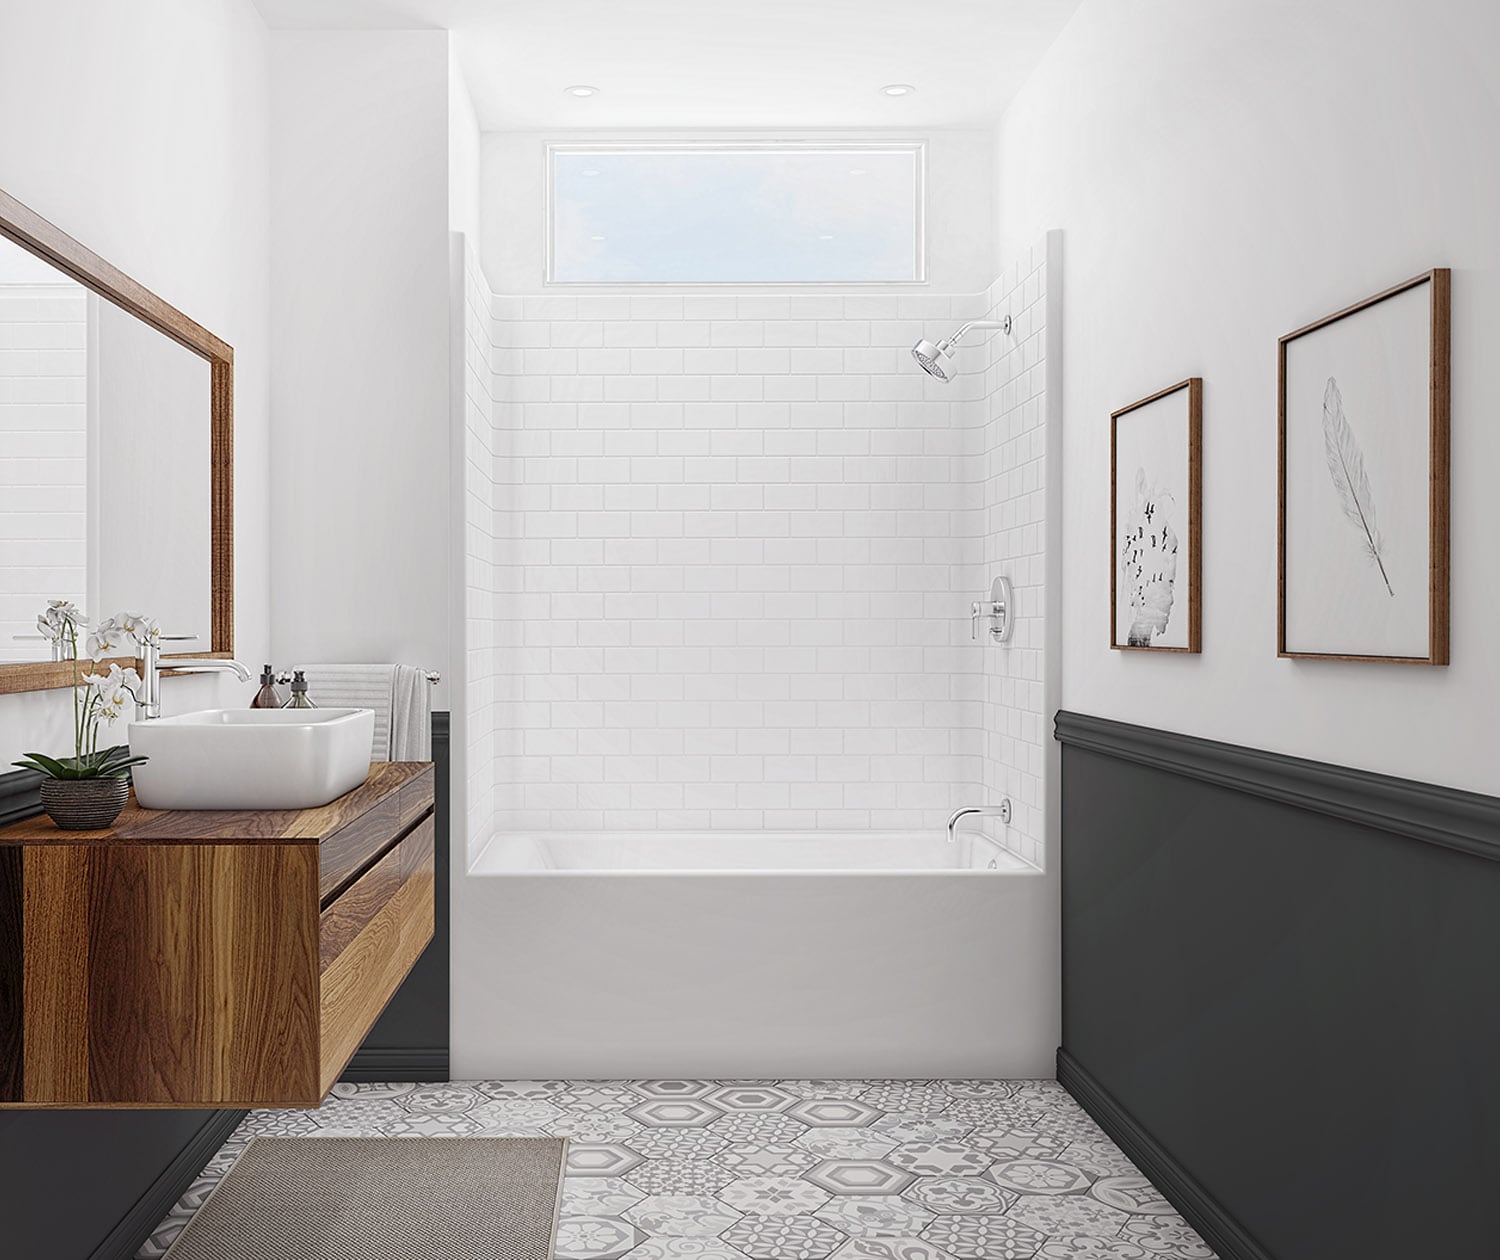 New This Week: 5 Beautiful Bathrooms With a Shower-Tub Combo